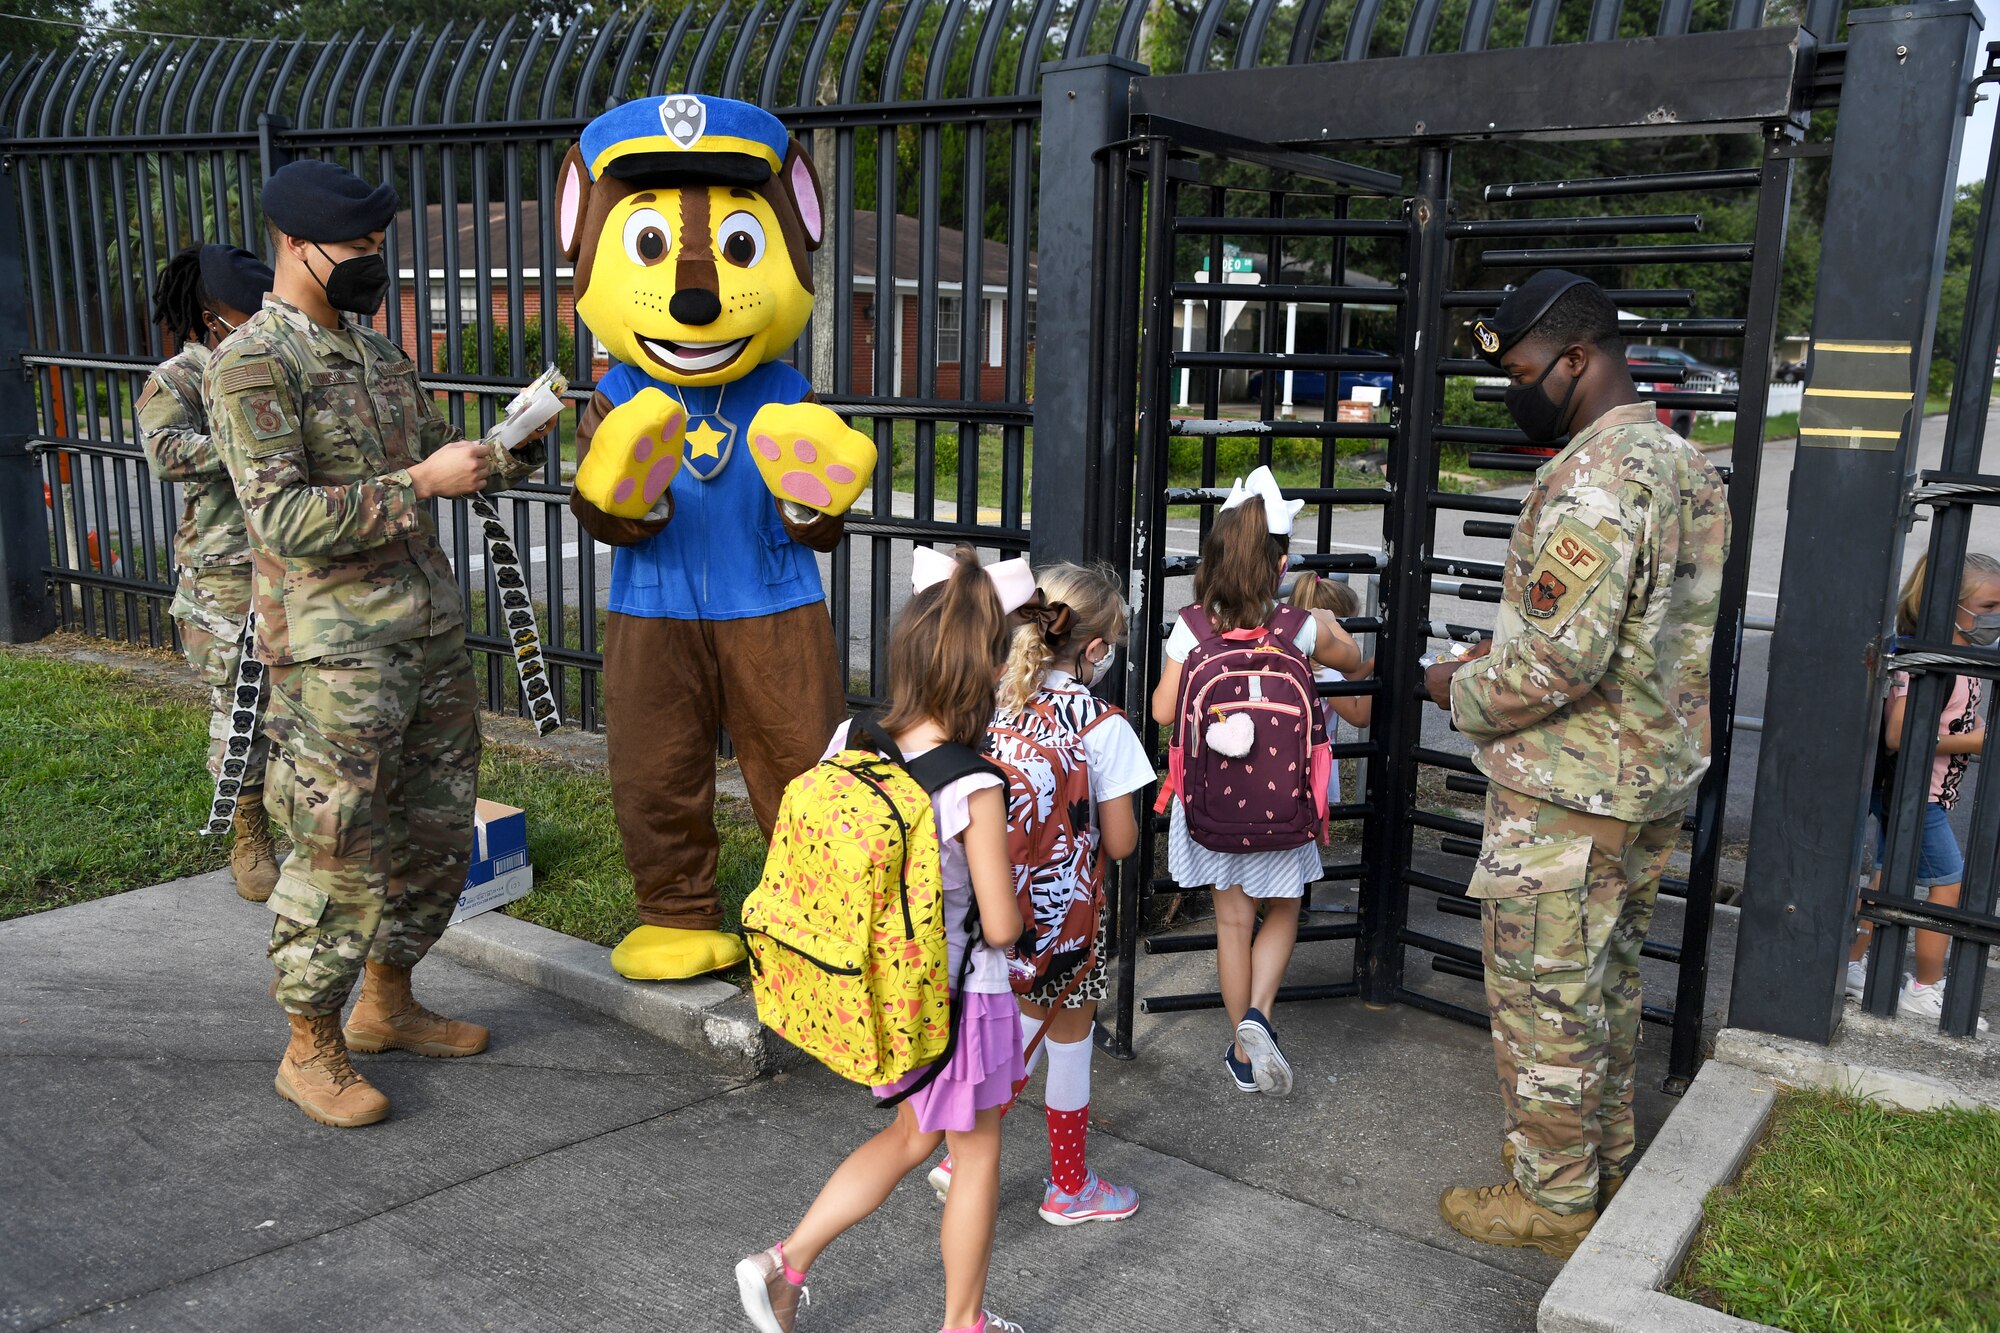 Members of the 81st Security Forces Squadron and Chase the Paw Patrol dog greet military children for the first day of school near the pedestrian gate at Keesler Air Force Base, Mississippi, Aug. 4, 2021. Defenders welcomed the children with stickers as they went to Jeff Davis Elementary School. (U.S. Air Force photo by Kemberly Groue)